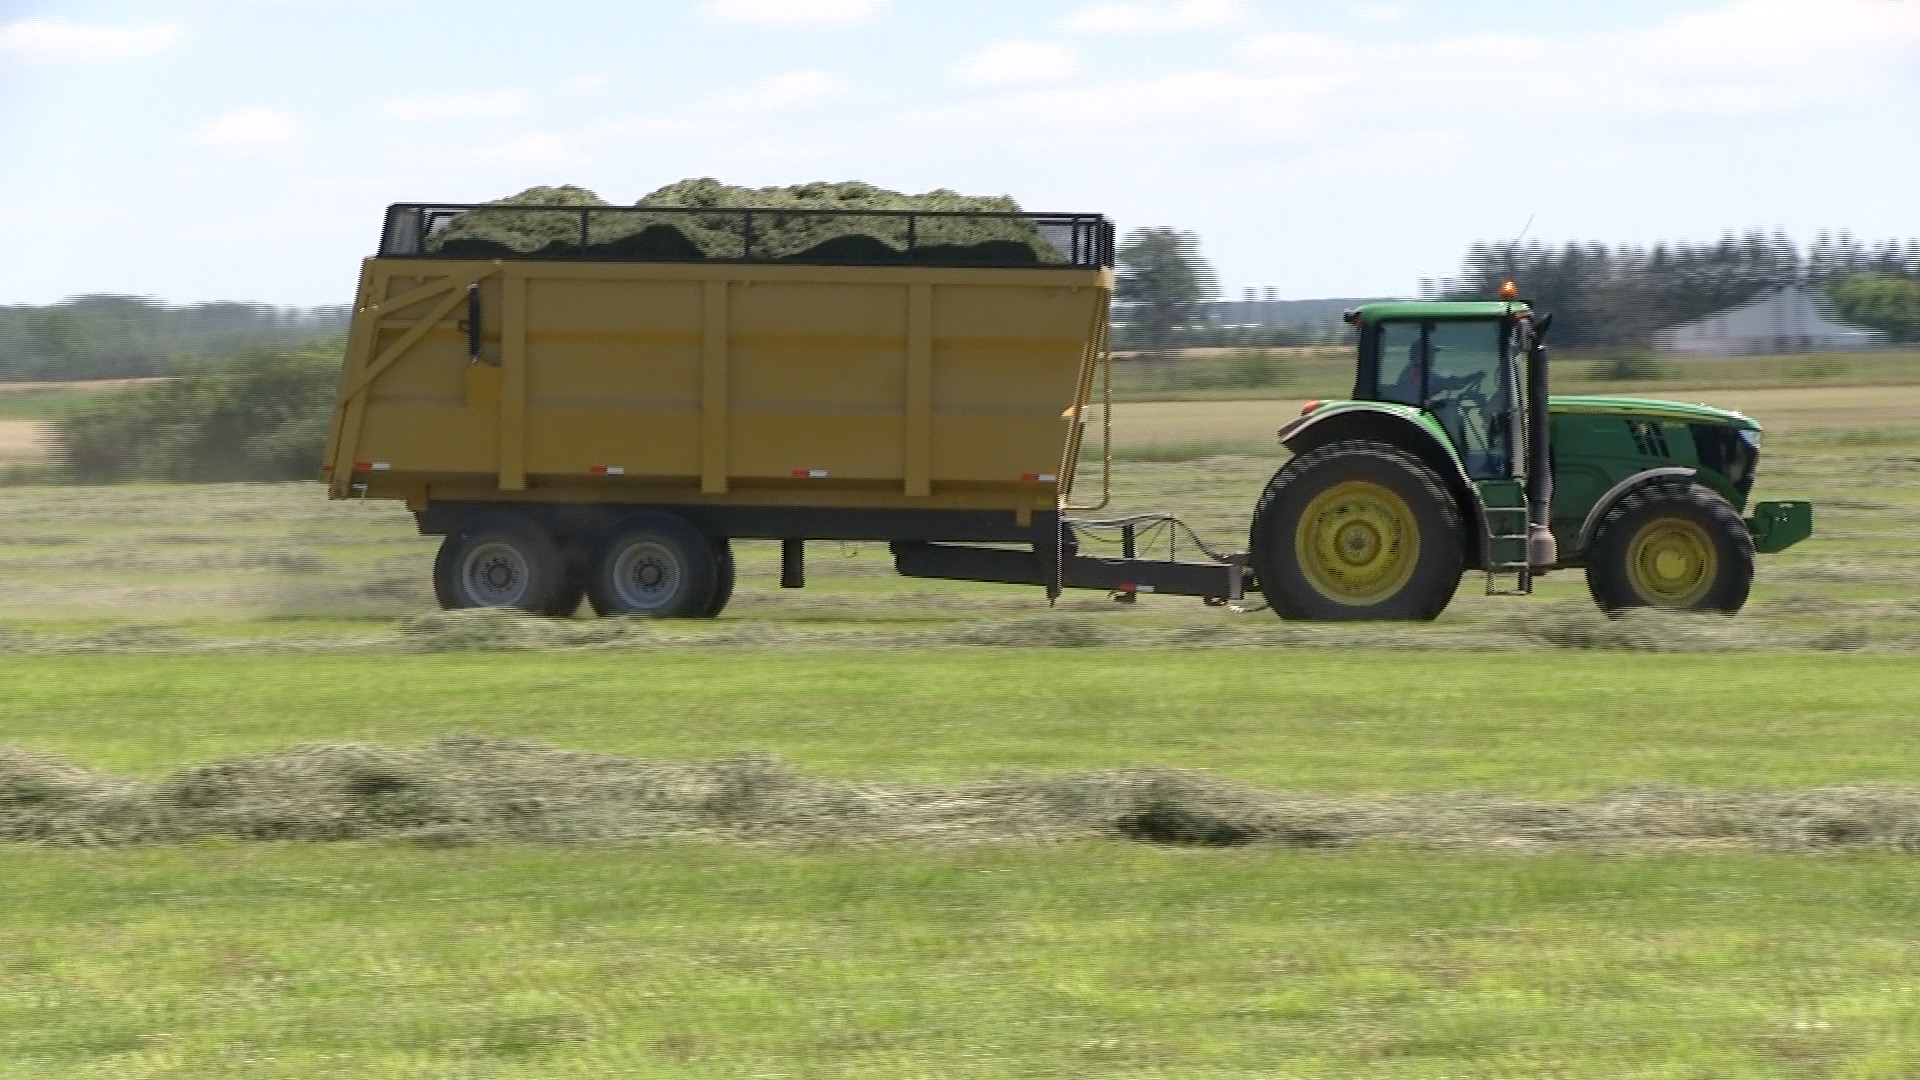 A side shot of the 20 ton dumper trailer being hauled by a tractor